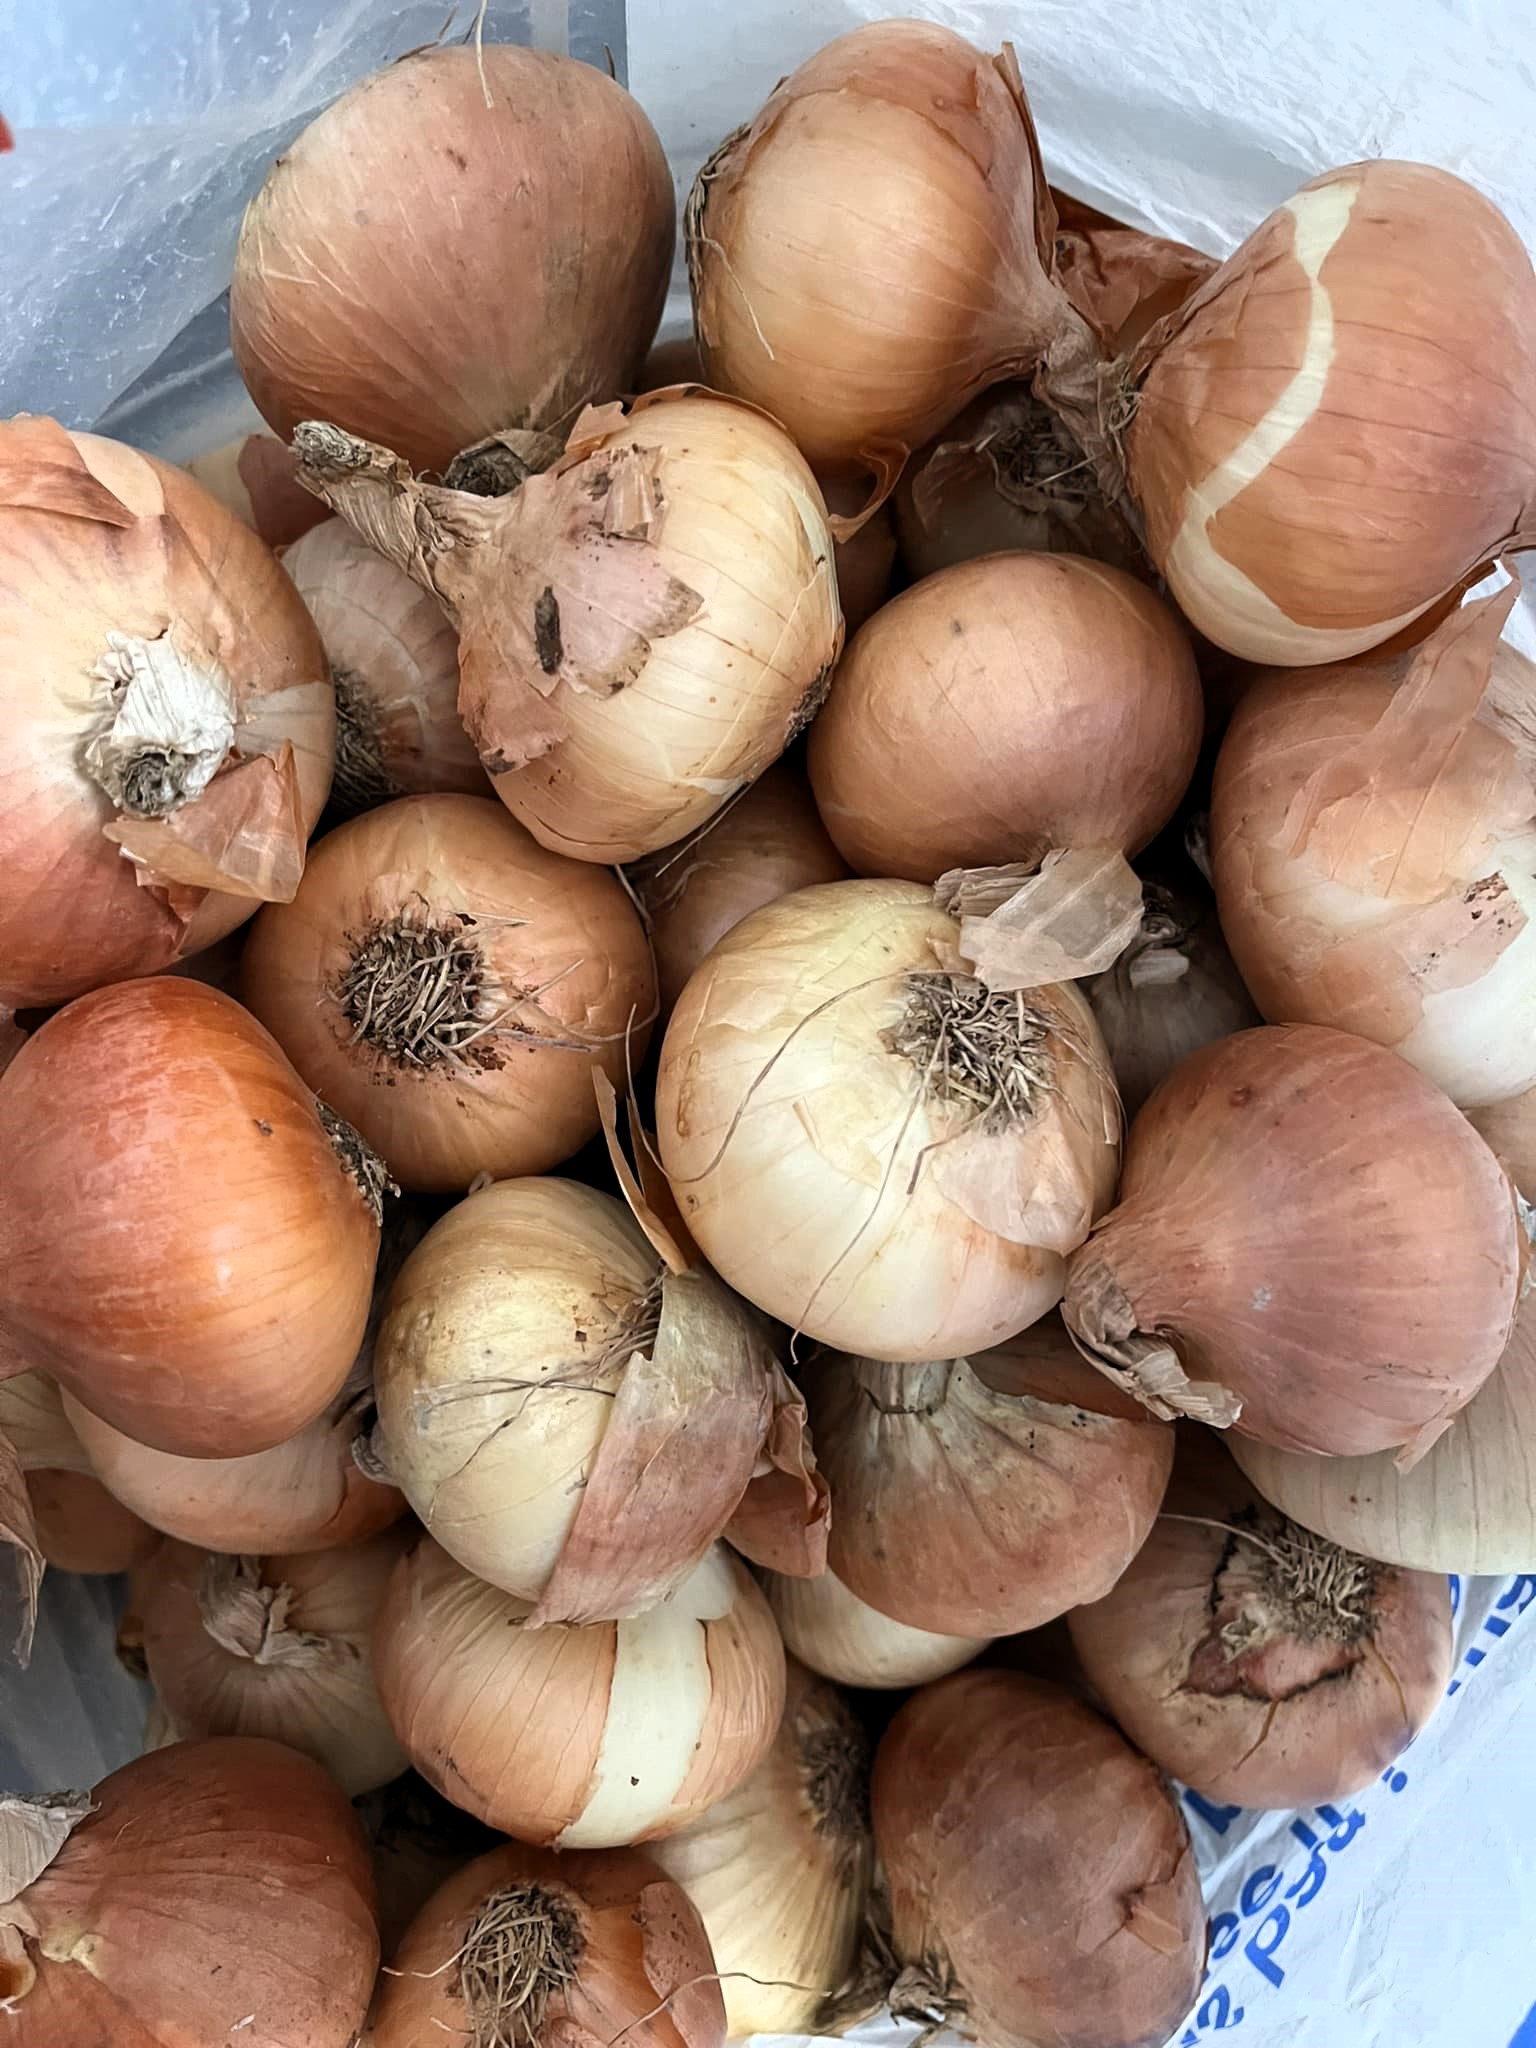 Shocked shopper receives 72 onions in a mystery Too Good To Go box from Morrisons. Tim Clarke now plans onion-based meals after his unexpected haul.